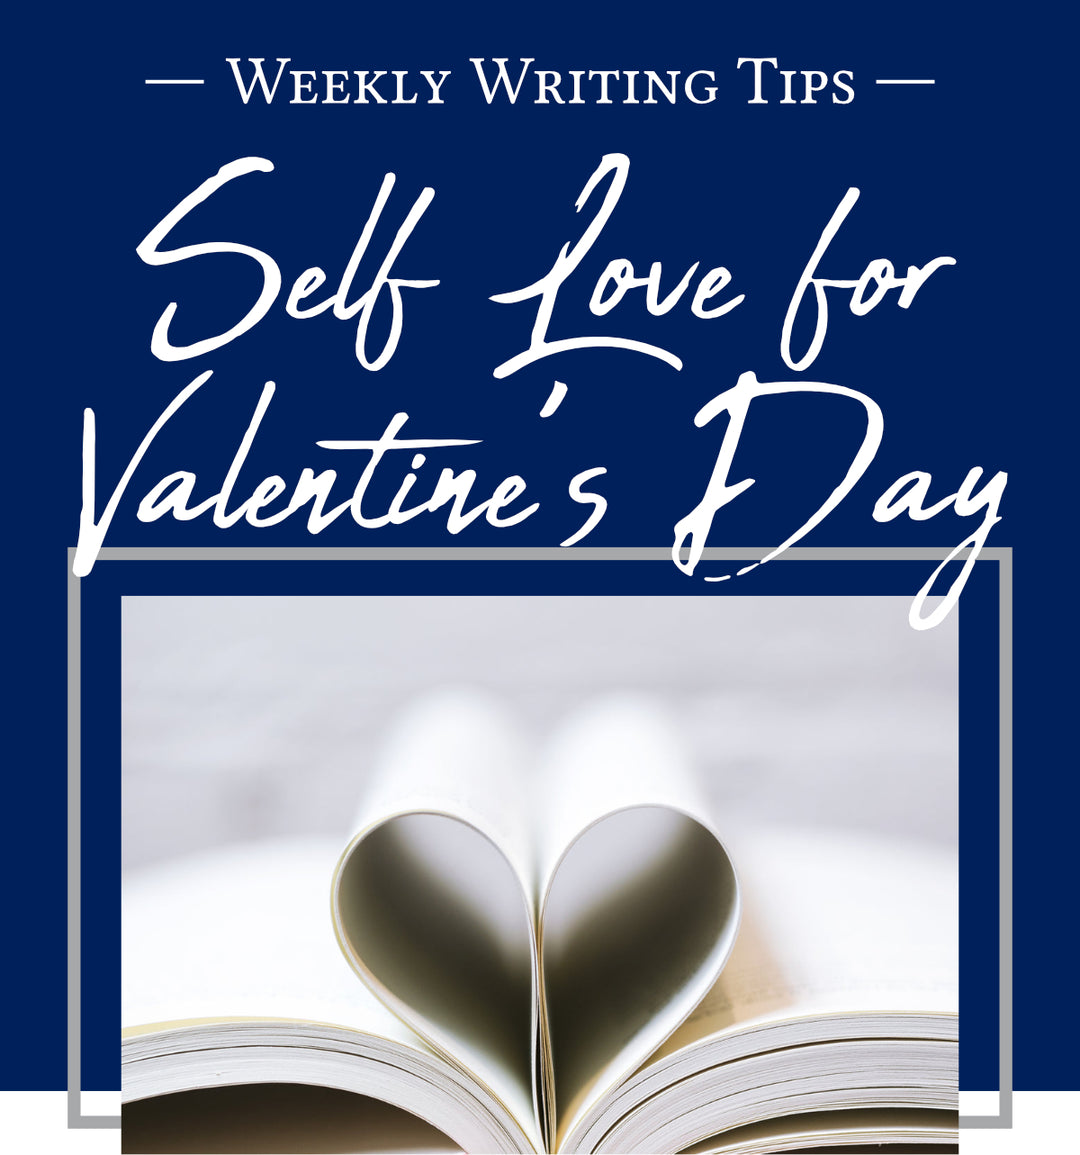 Weekly Writing Tips - Self Love for Valentine's Day